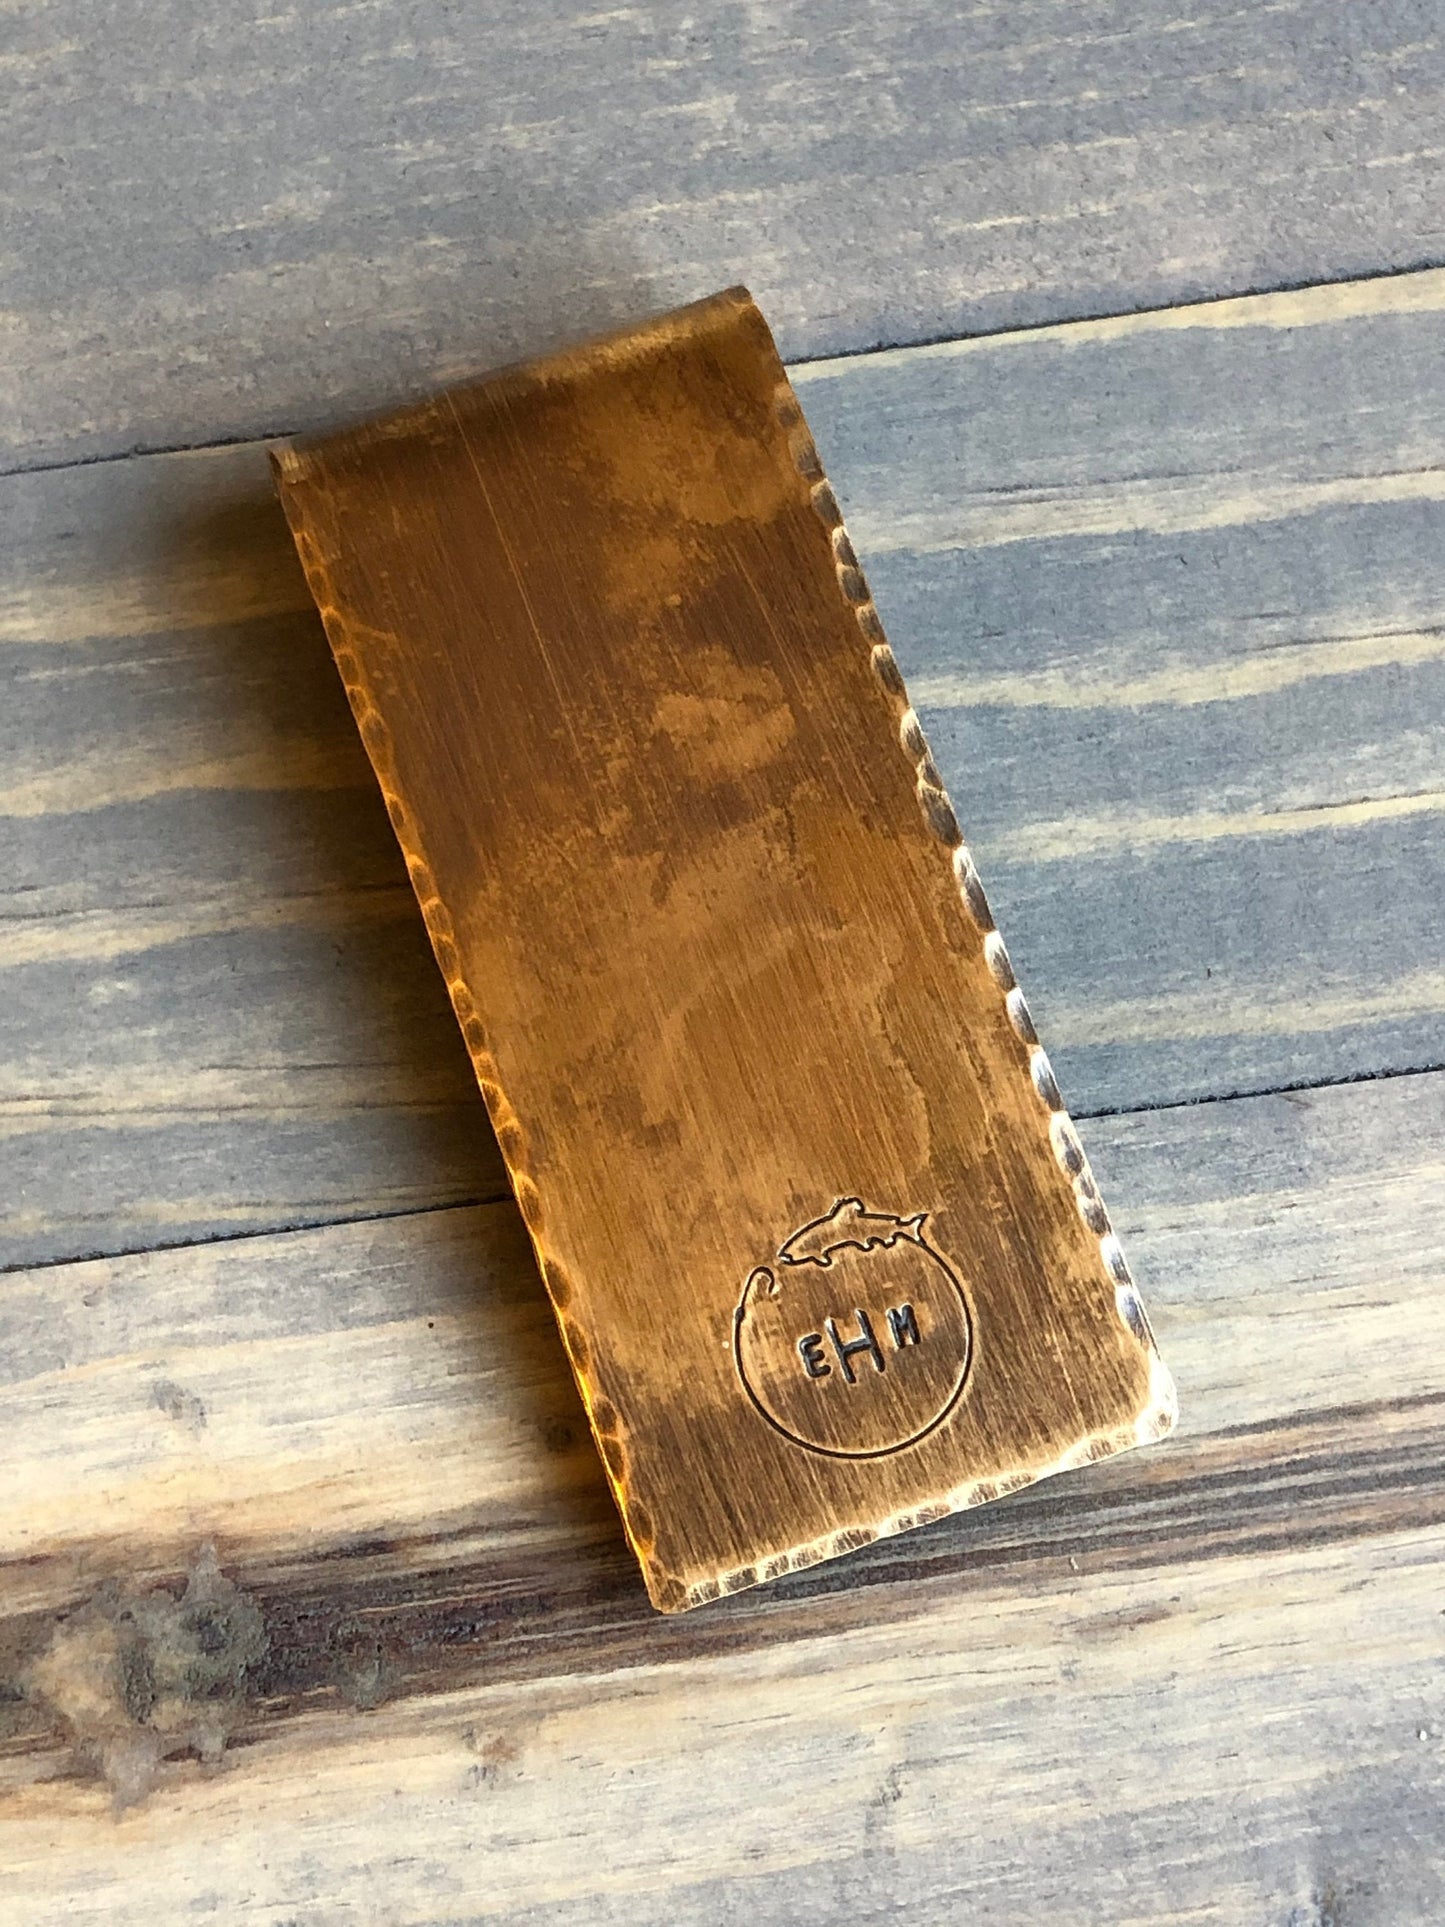 Custom Money Clips for Fisherman - 7th Anniversary Gift - Personalized - Hand Crafted Money Clip in Bronze, Silver, Copper-8th Anniversary